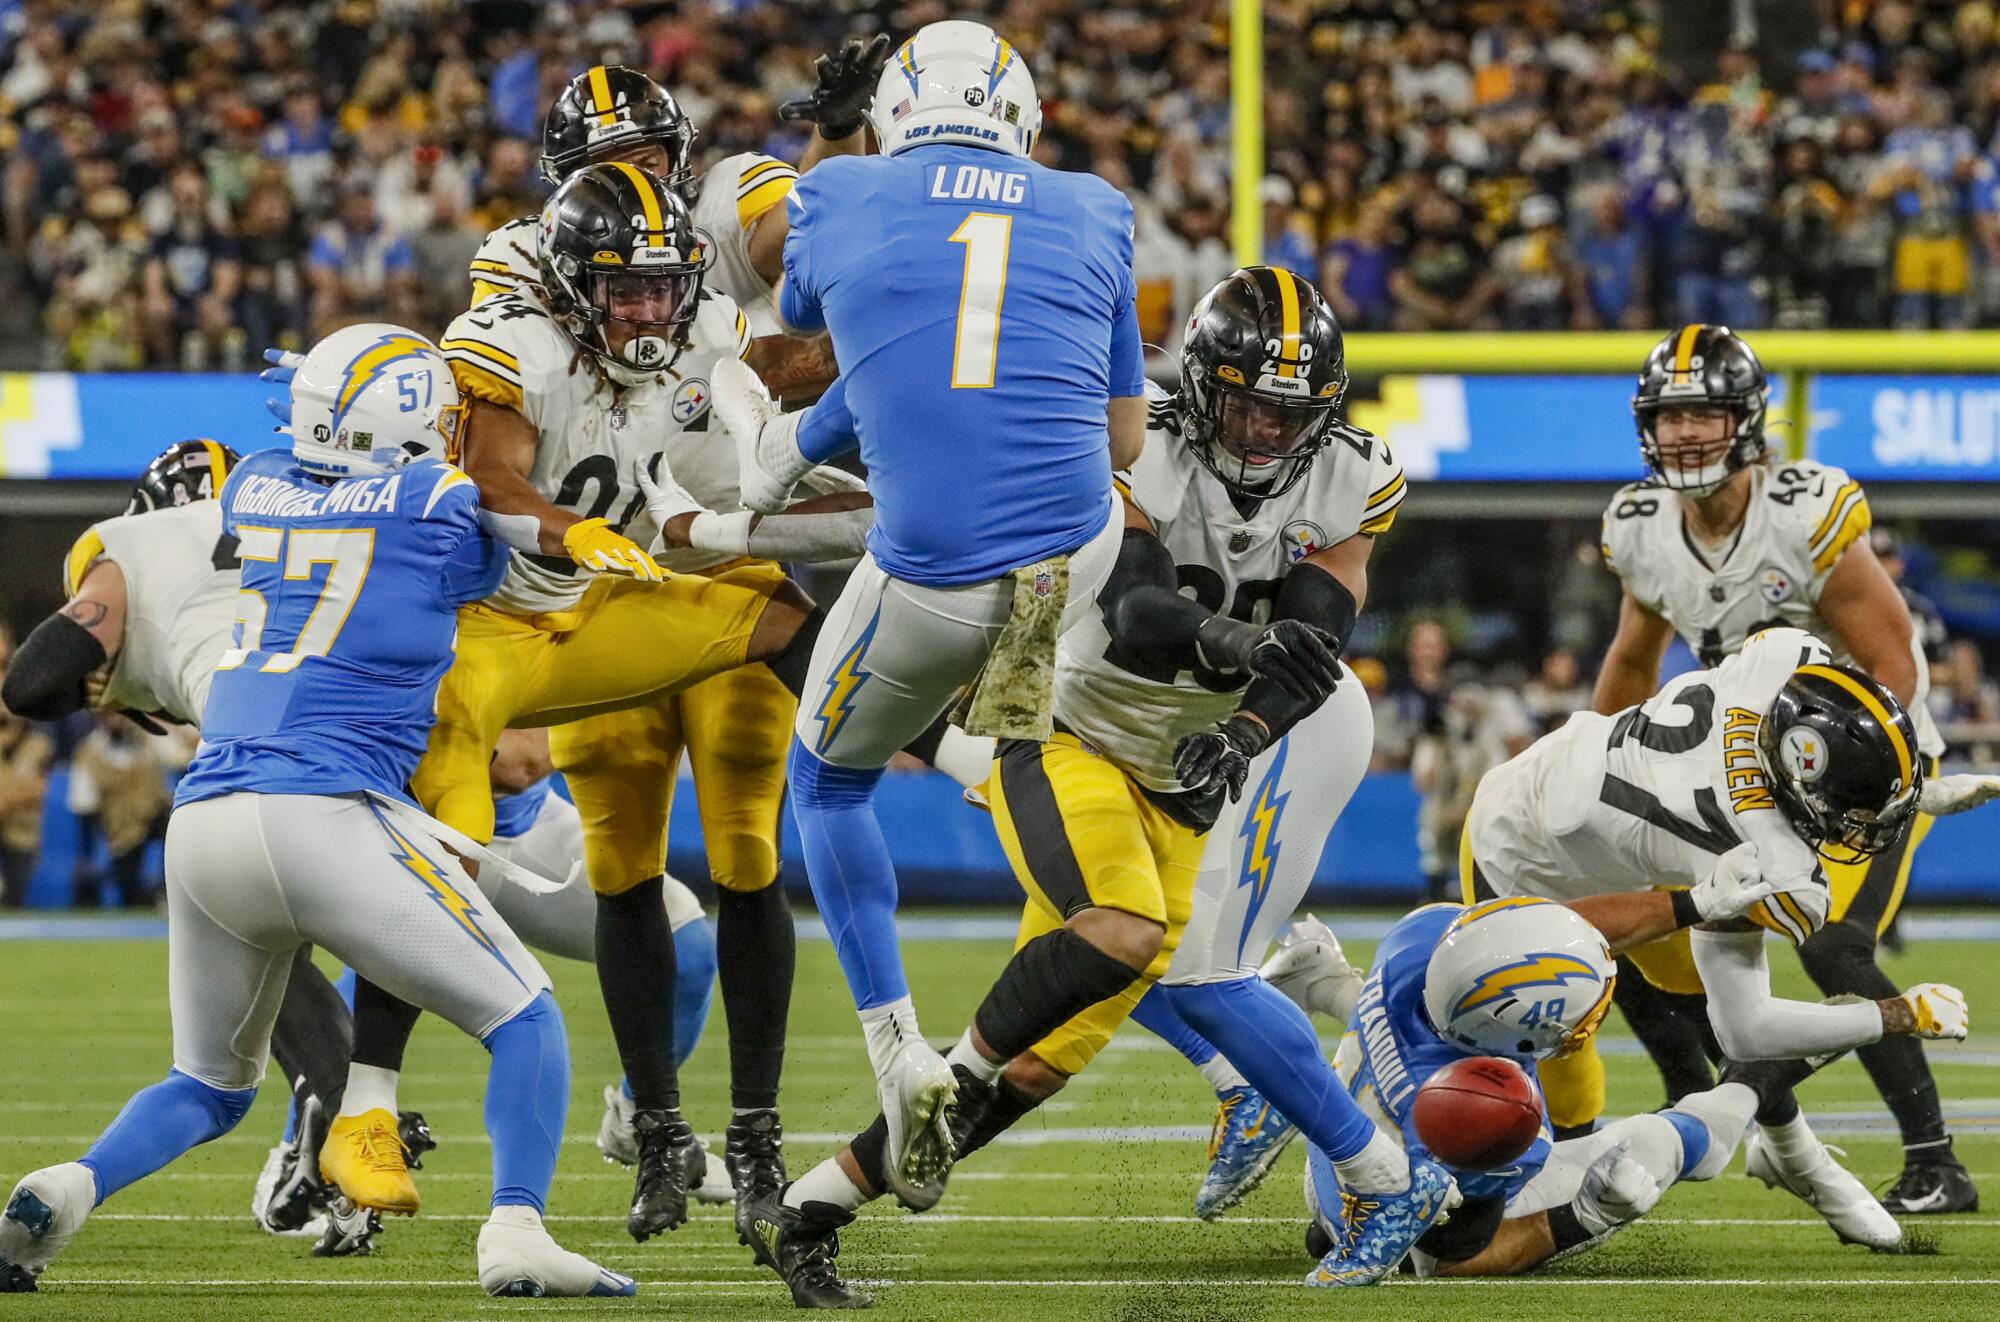 Pittsburgh Steelers safety Miles Killebrew blocks the punt by the Chargers' Ty Long during the second half.